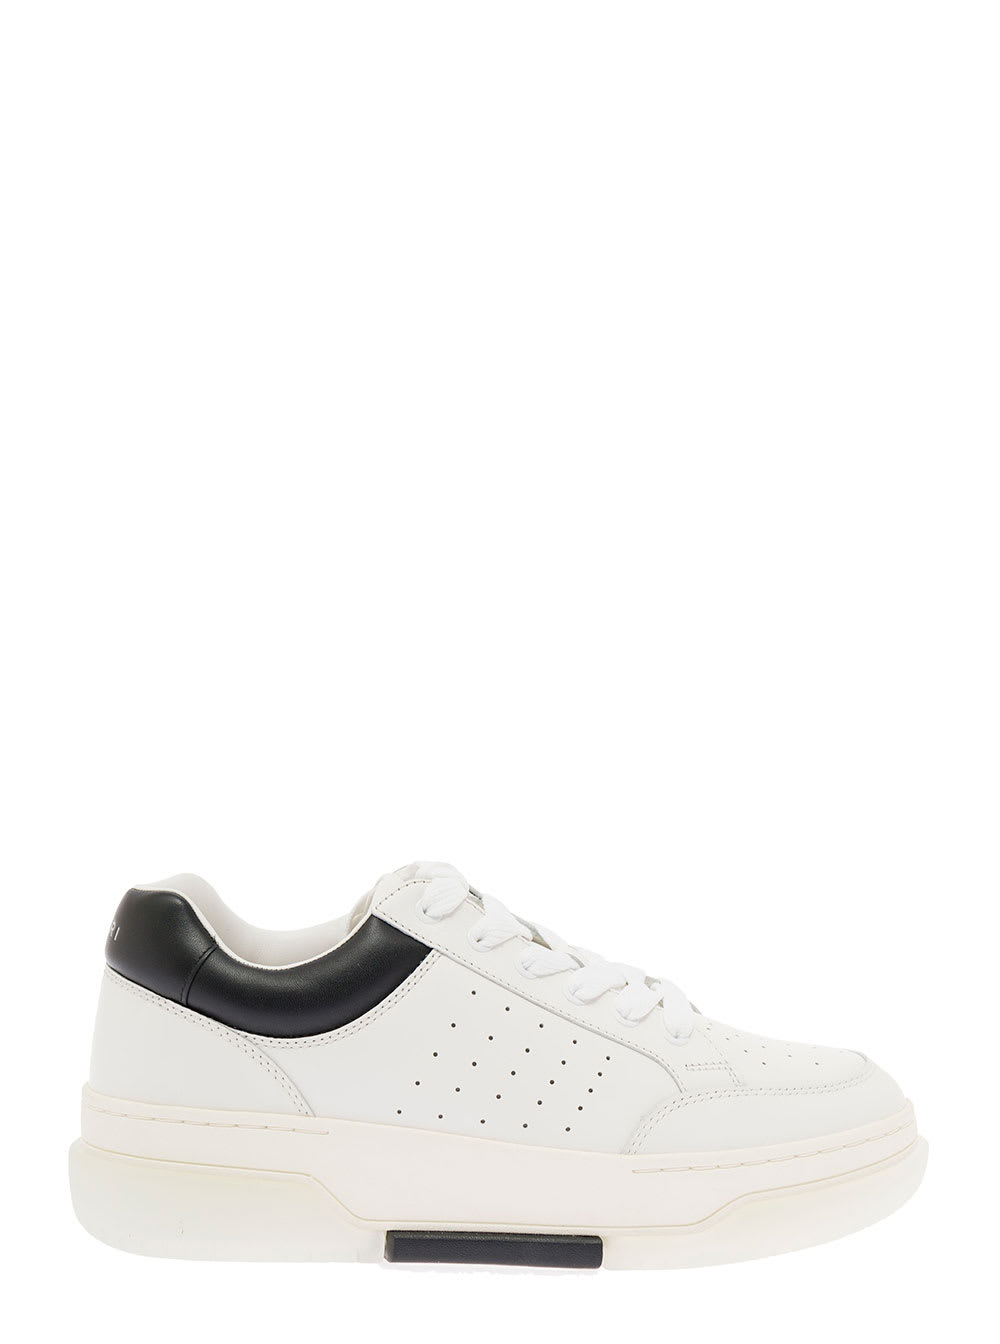 Amiri Mans Stadium White And Black Leather Low Sneakers